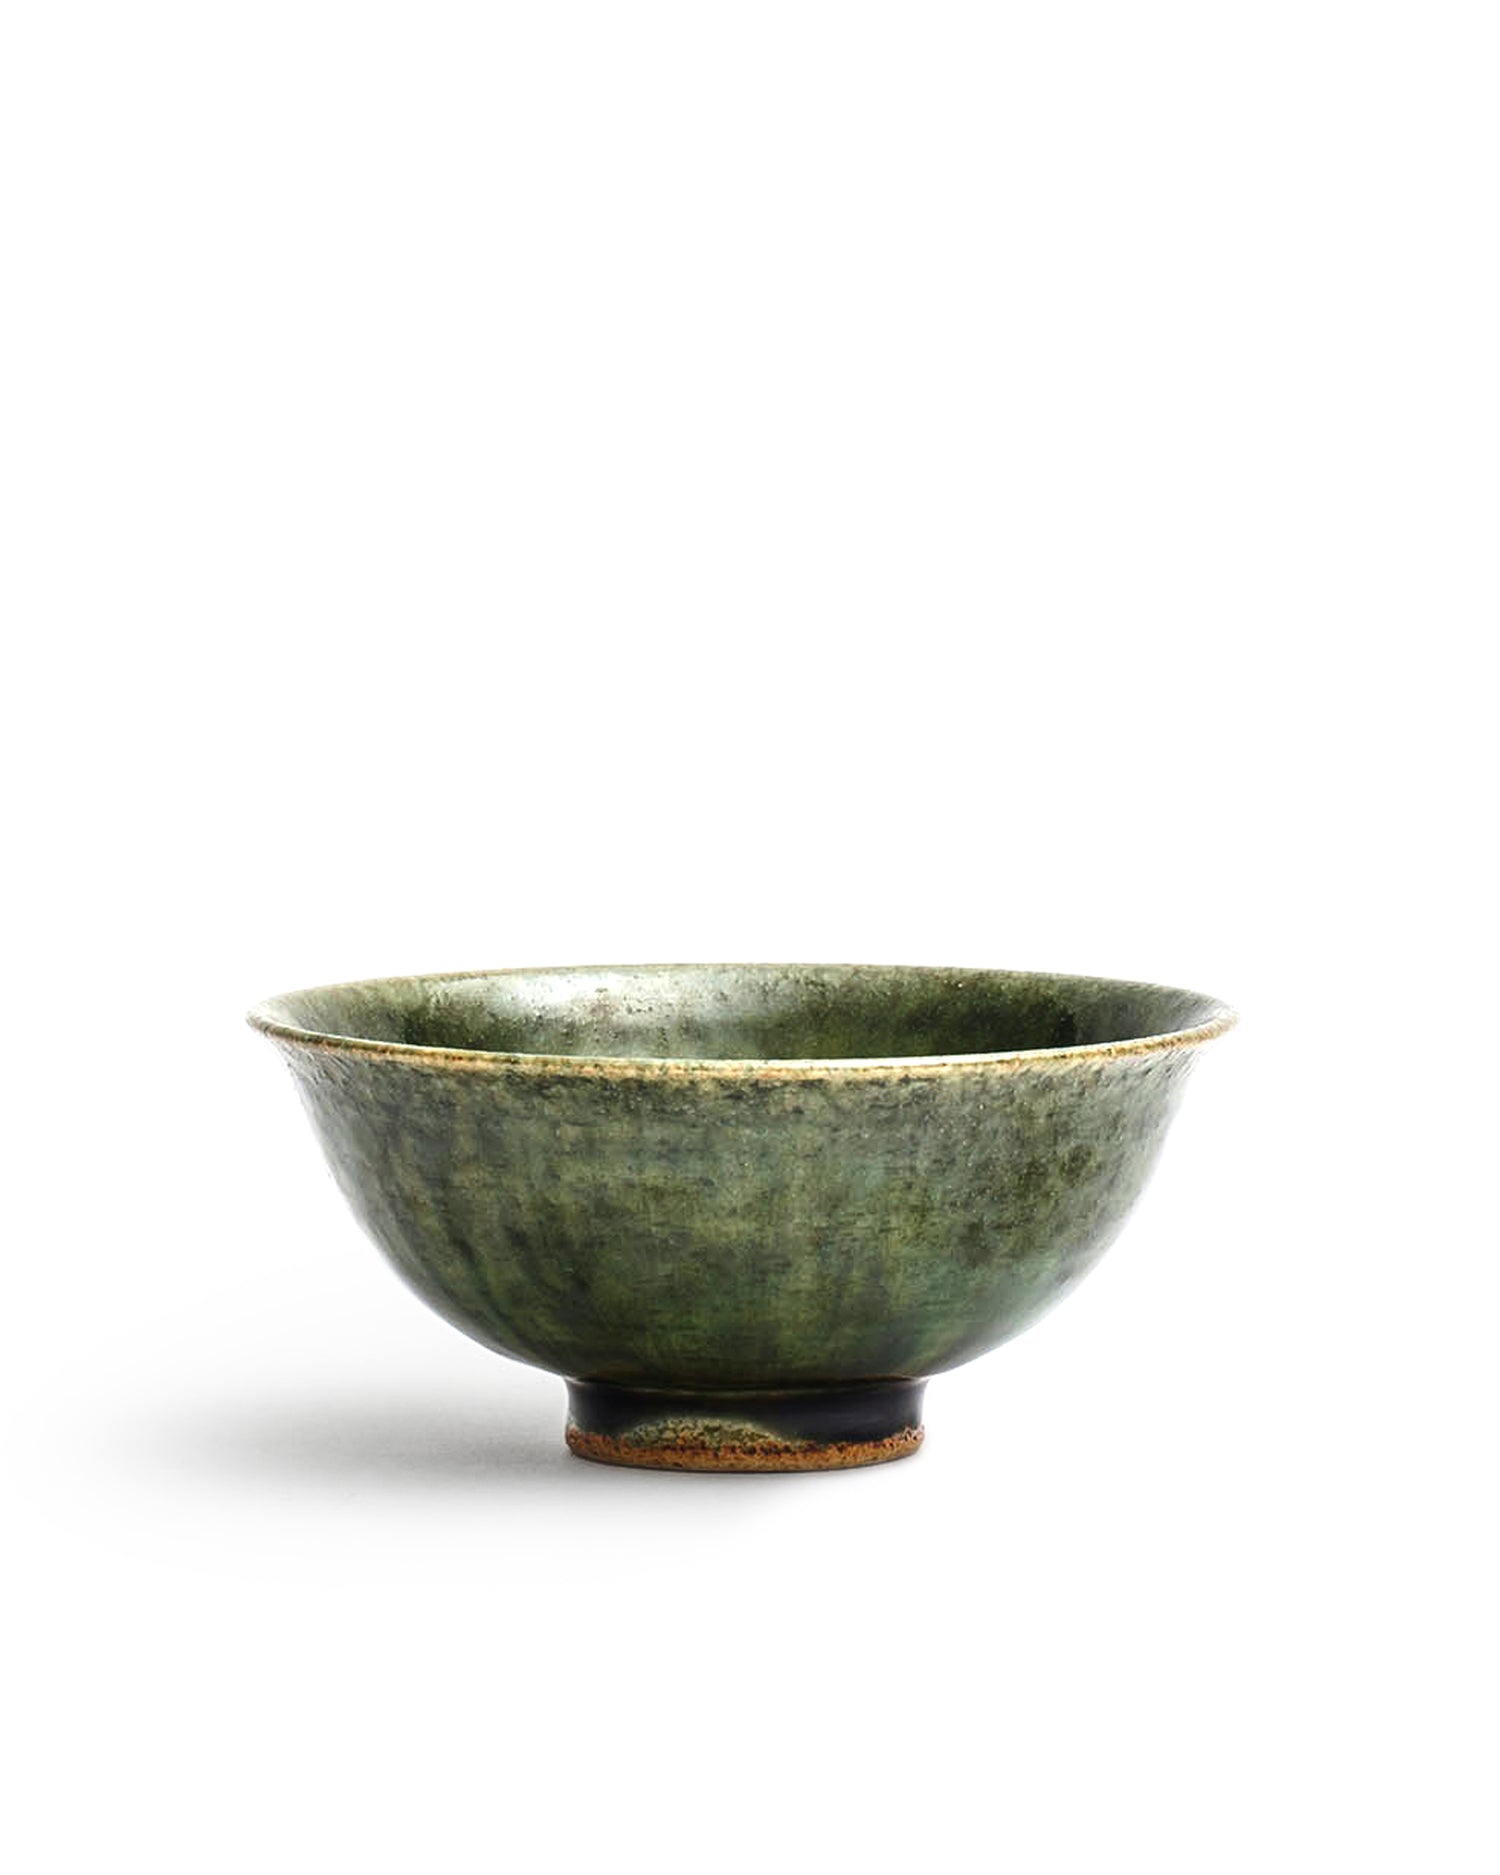 Silhouetted image of ceramic oribe rice bowl with deep green glaze by Time and Style against white background. 